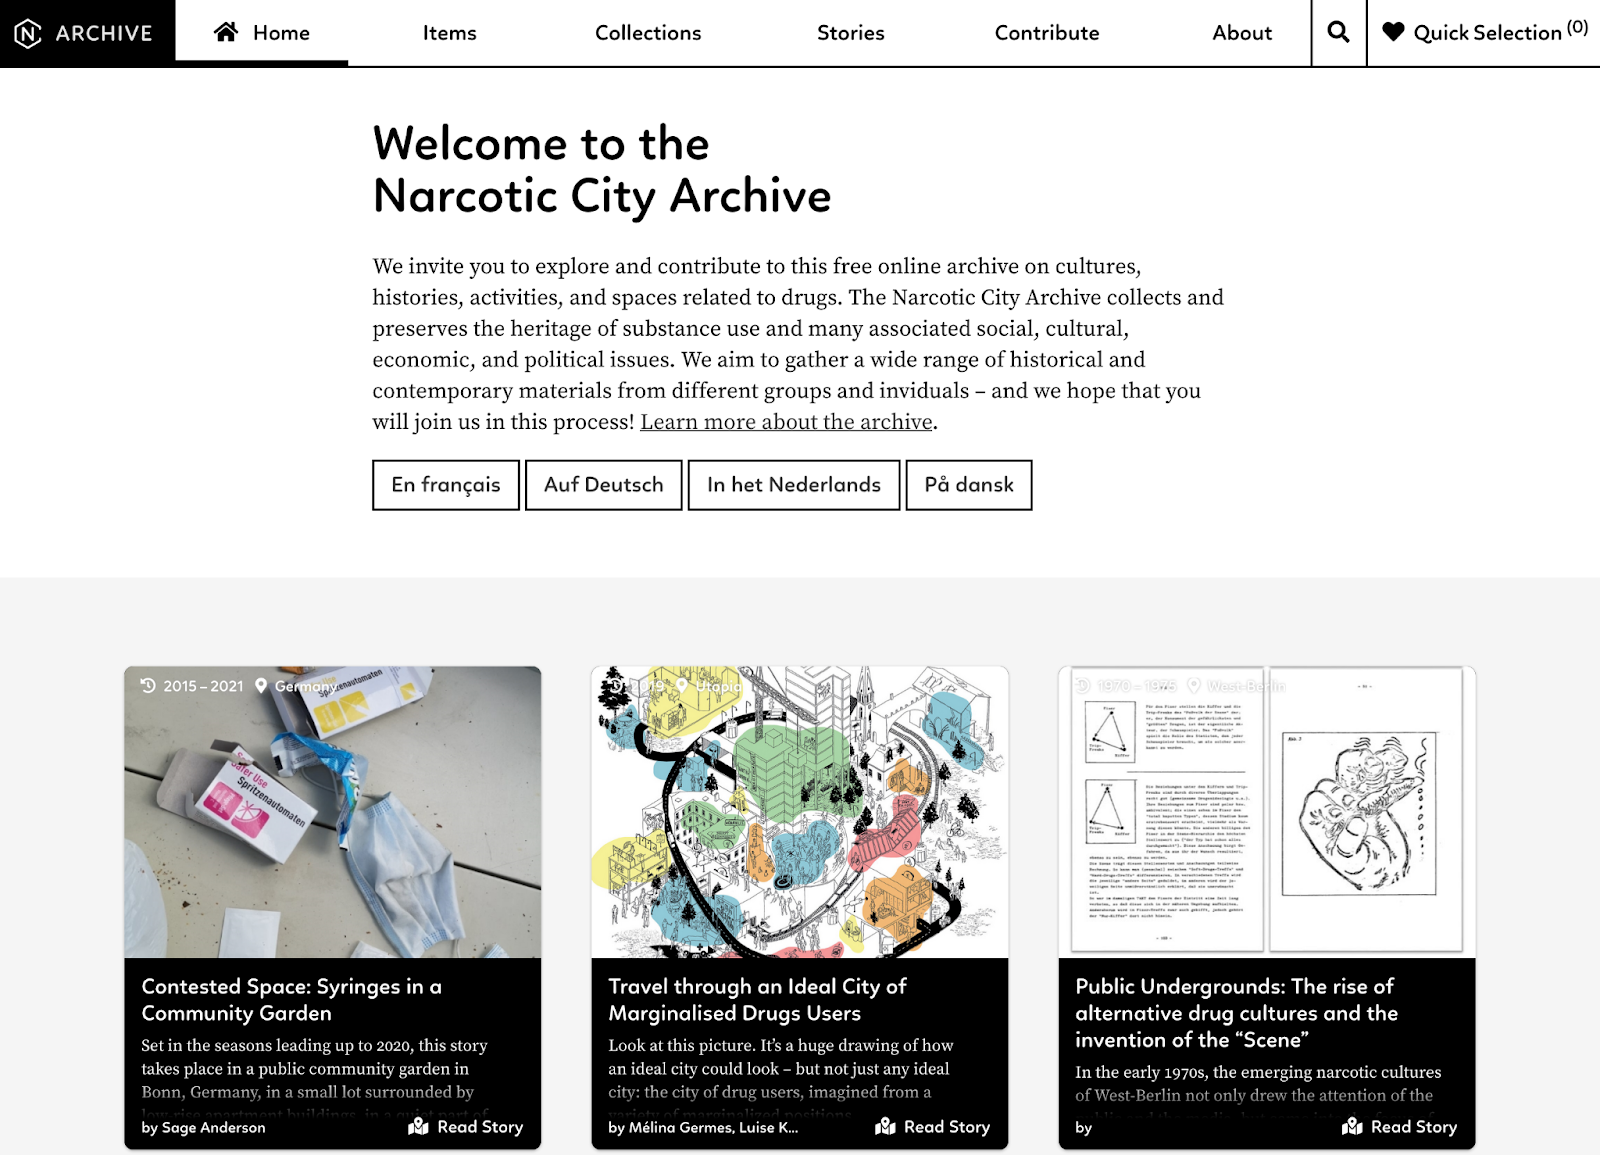 Screenshot of Narcotics City Archive homepage with a header, introductory text and three featured exhibits